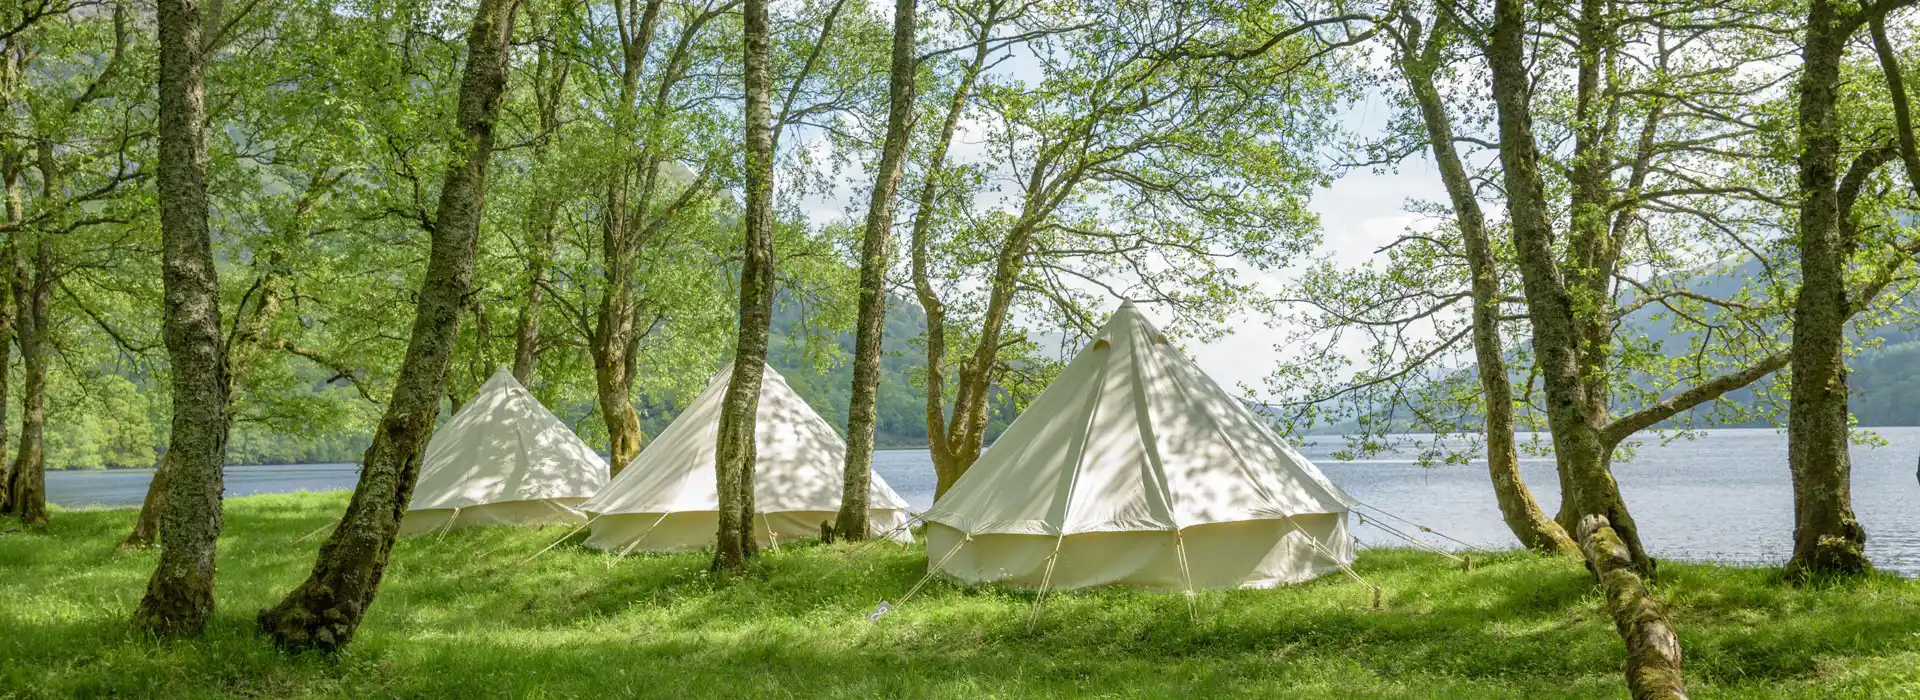 Bell tents in Scotland